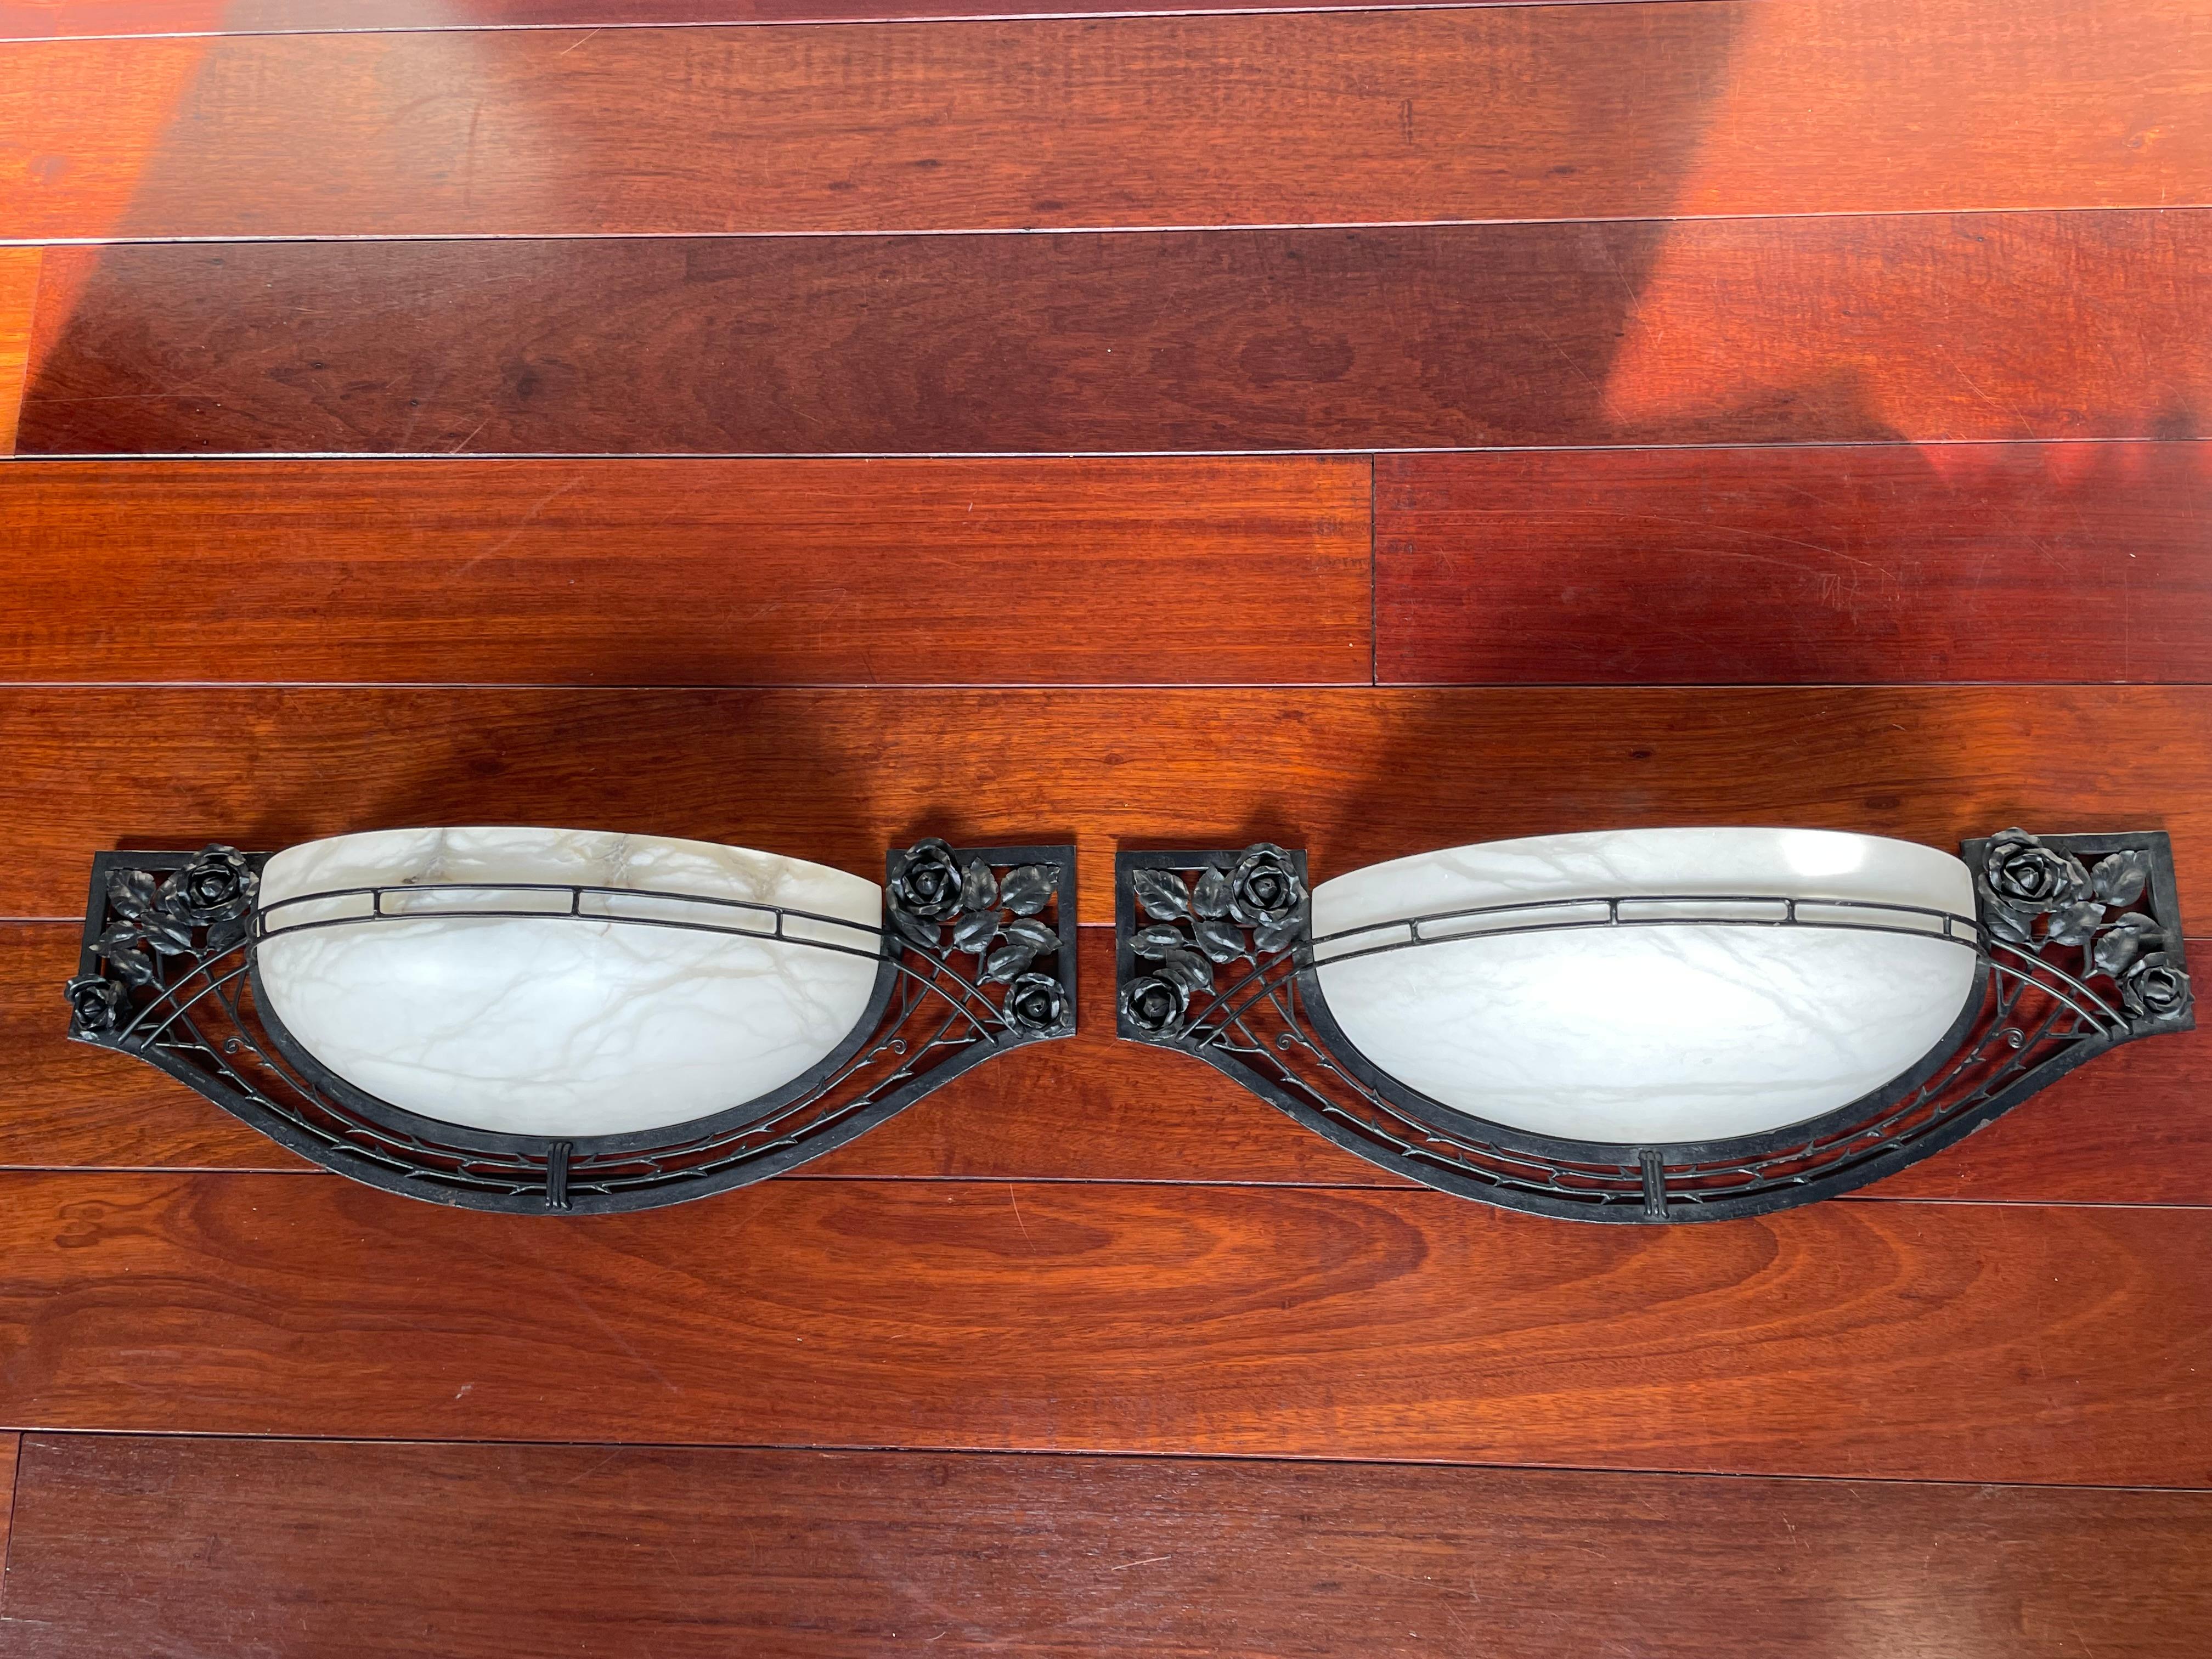 Impressive pair of sizable wall sconces with stunning alabaster shades.

This rare pair of Art Deco style sconces is beautiful both in design and execution. The combination of the blackened wrought iron with the hand-crafted rose motifs and the